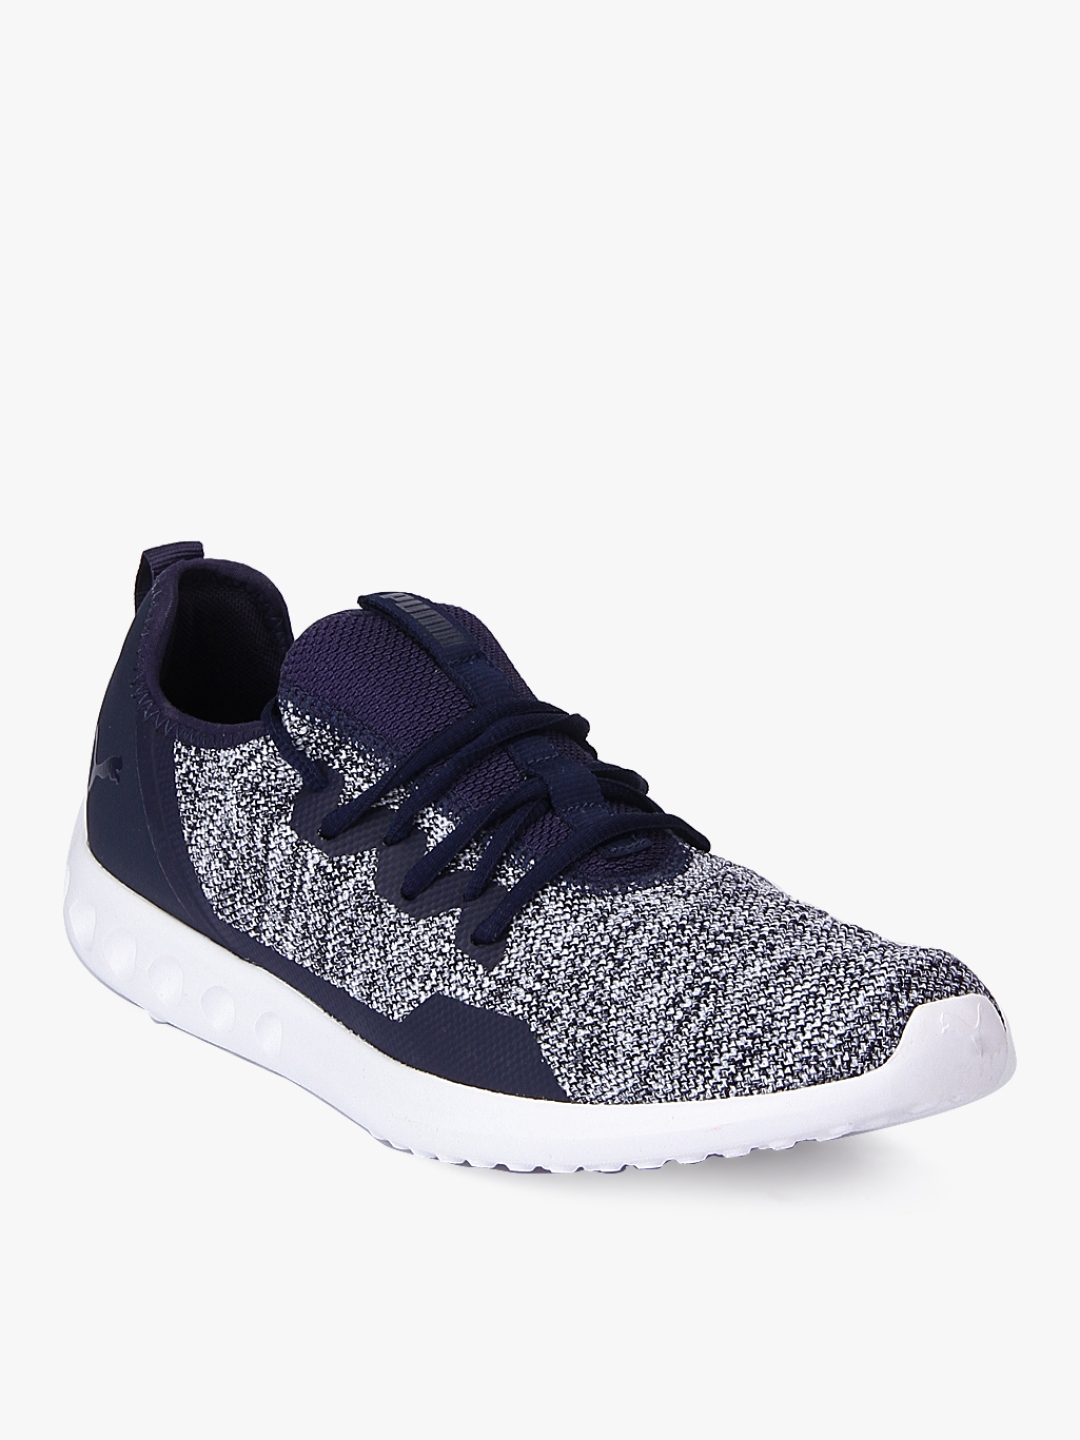 Buy Carson 2 X Knit Idp Navy Blue Running Shoes - Sports Shoes for ...